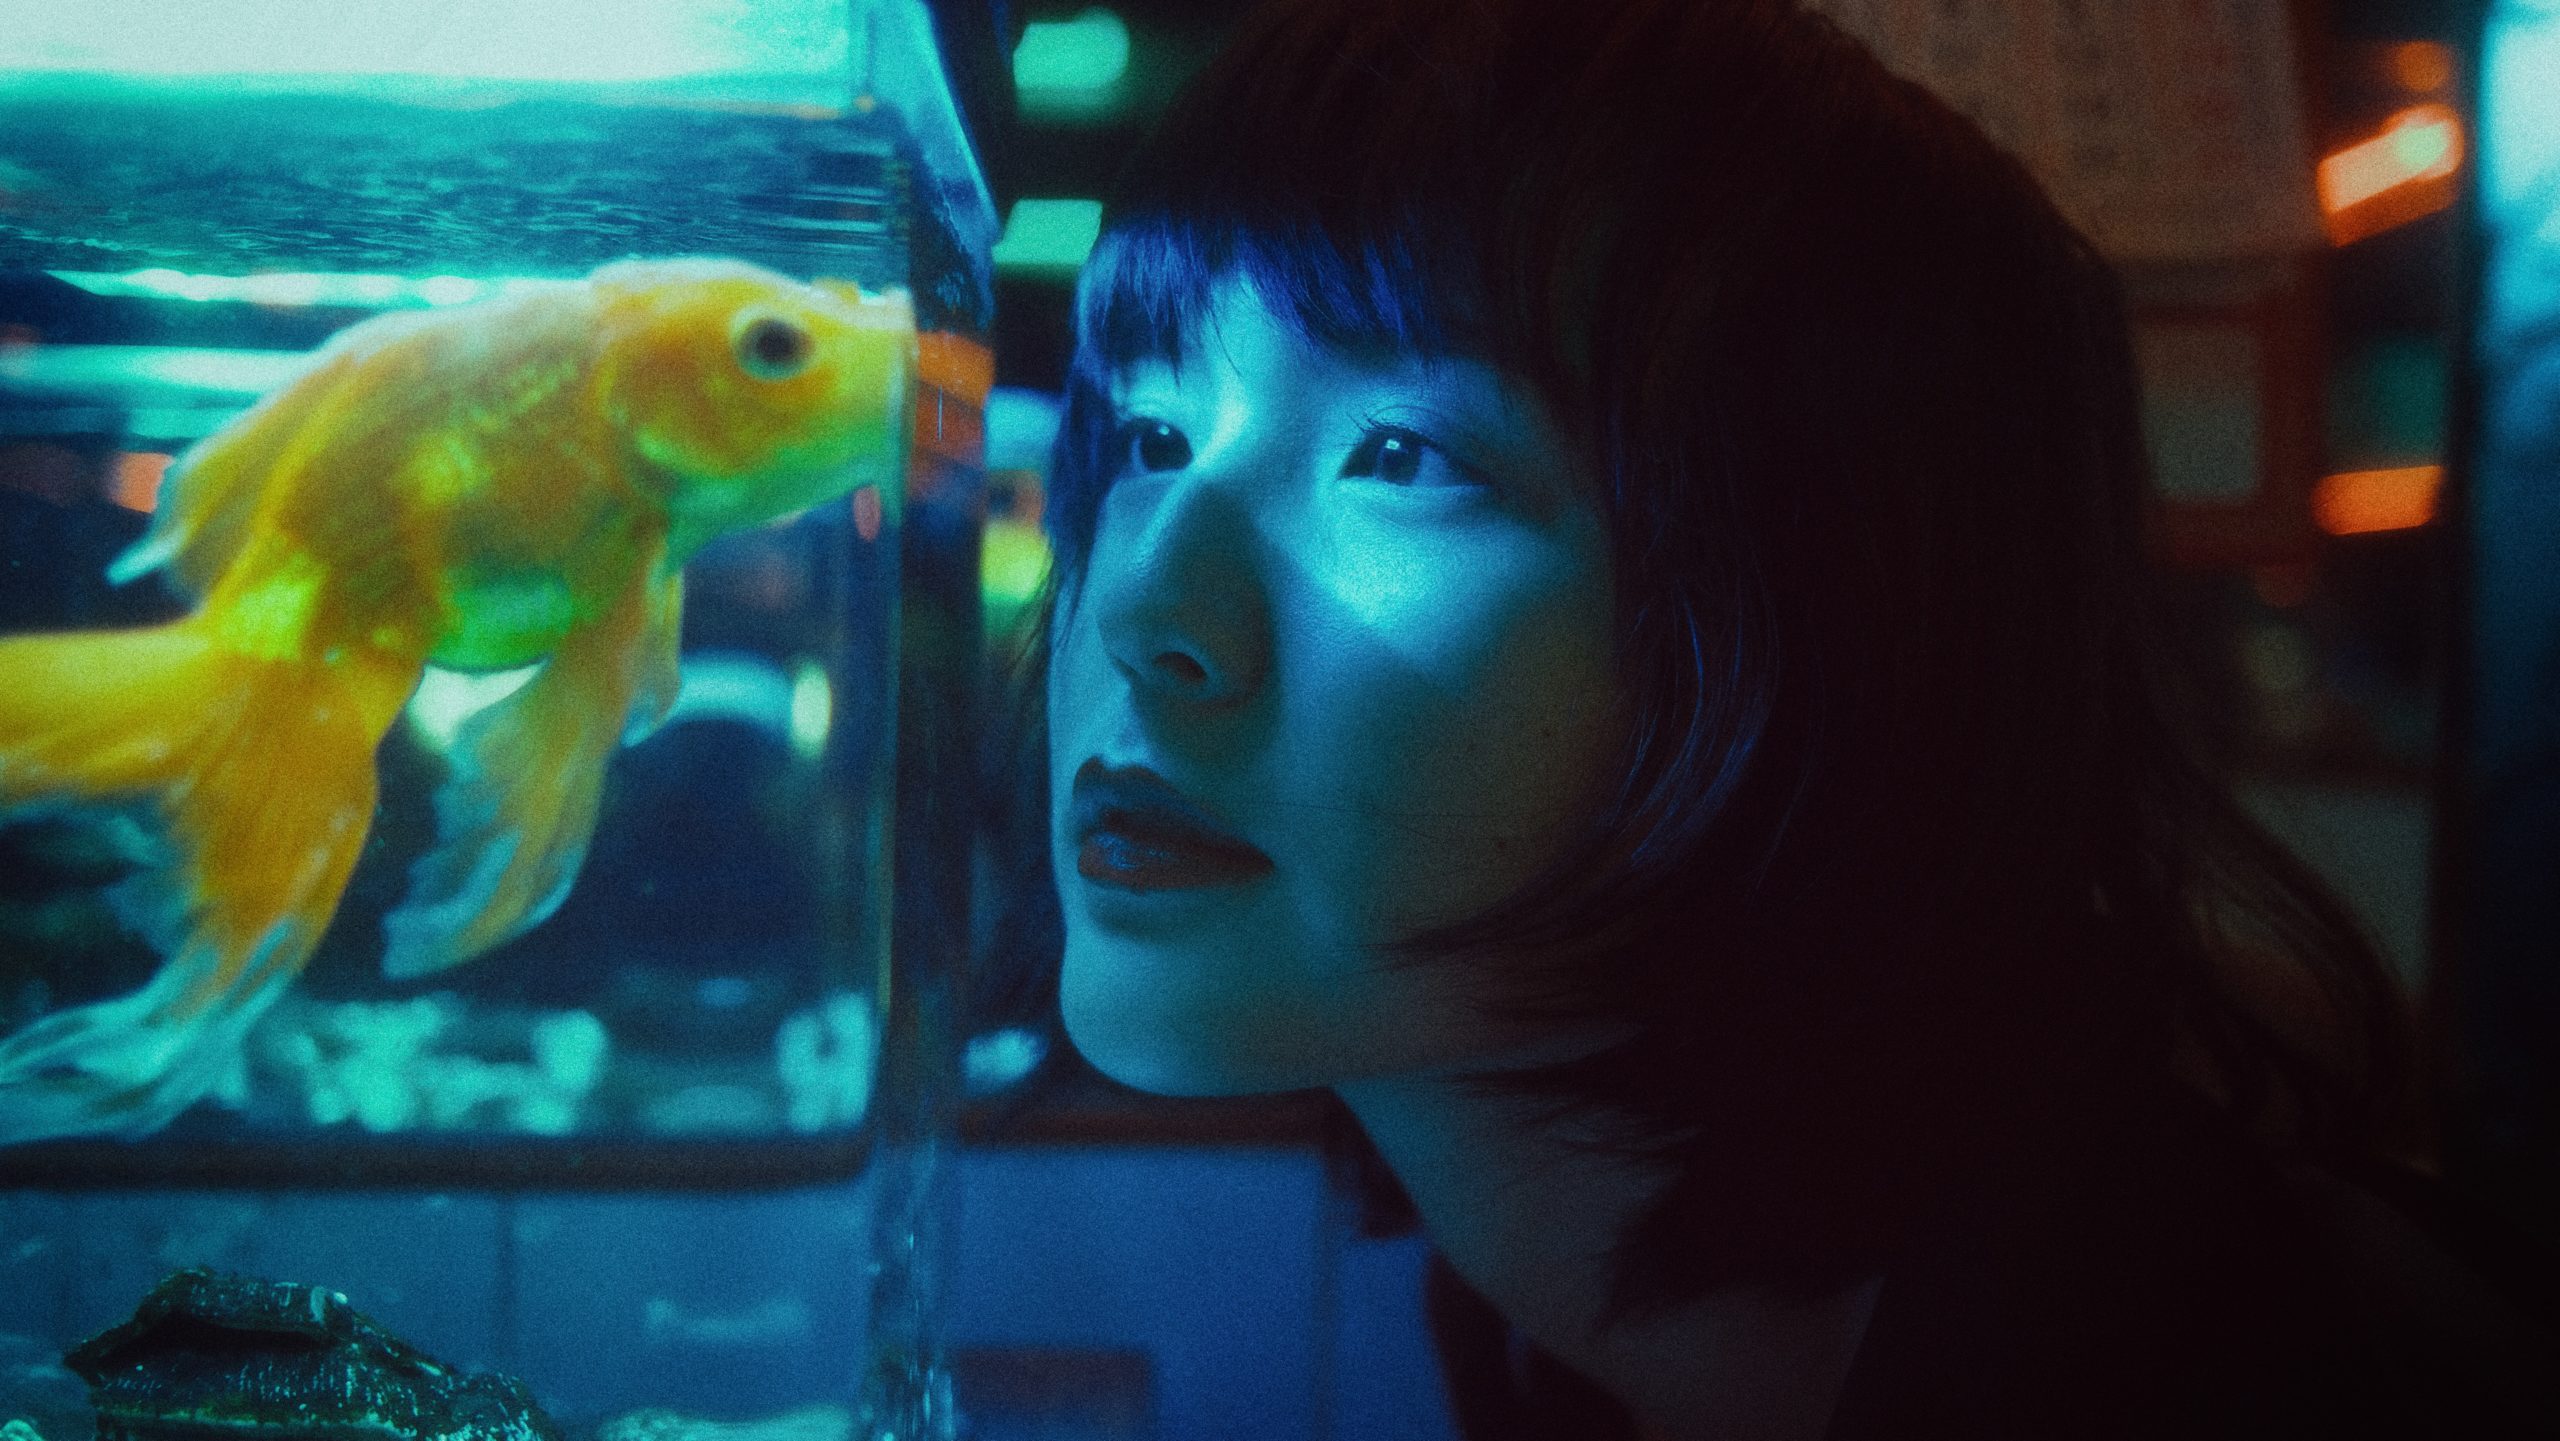 A woman closely inspecting a fish in a fishtank under blue light.